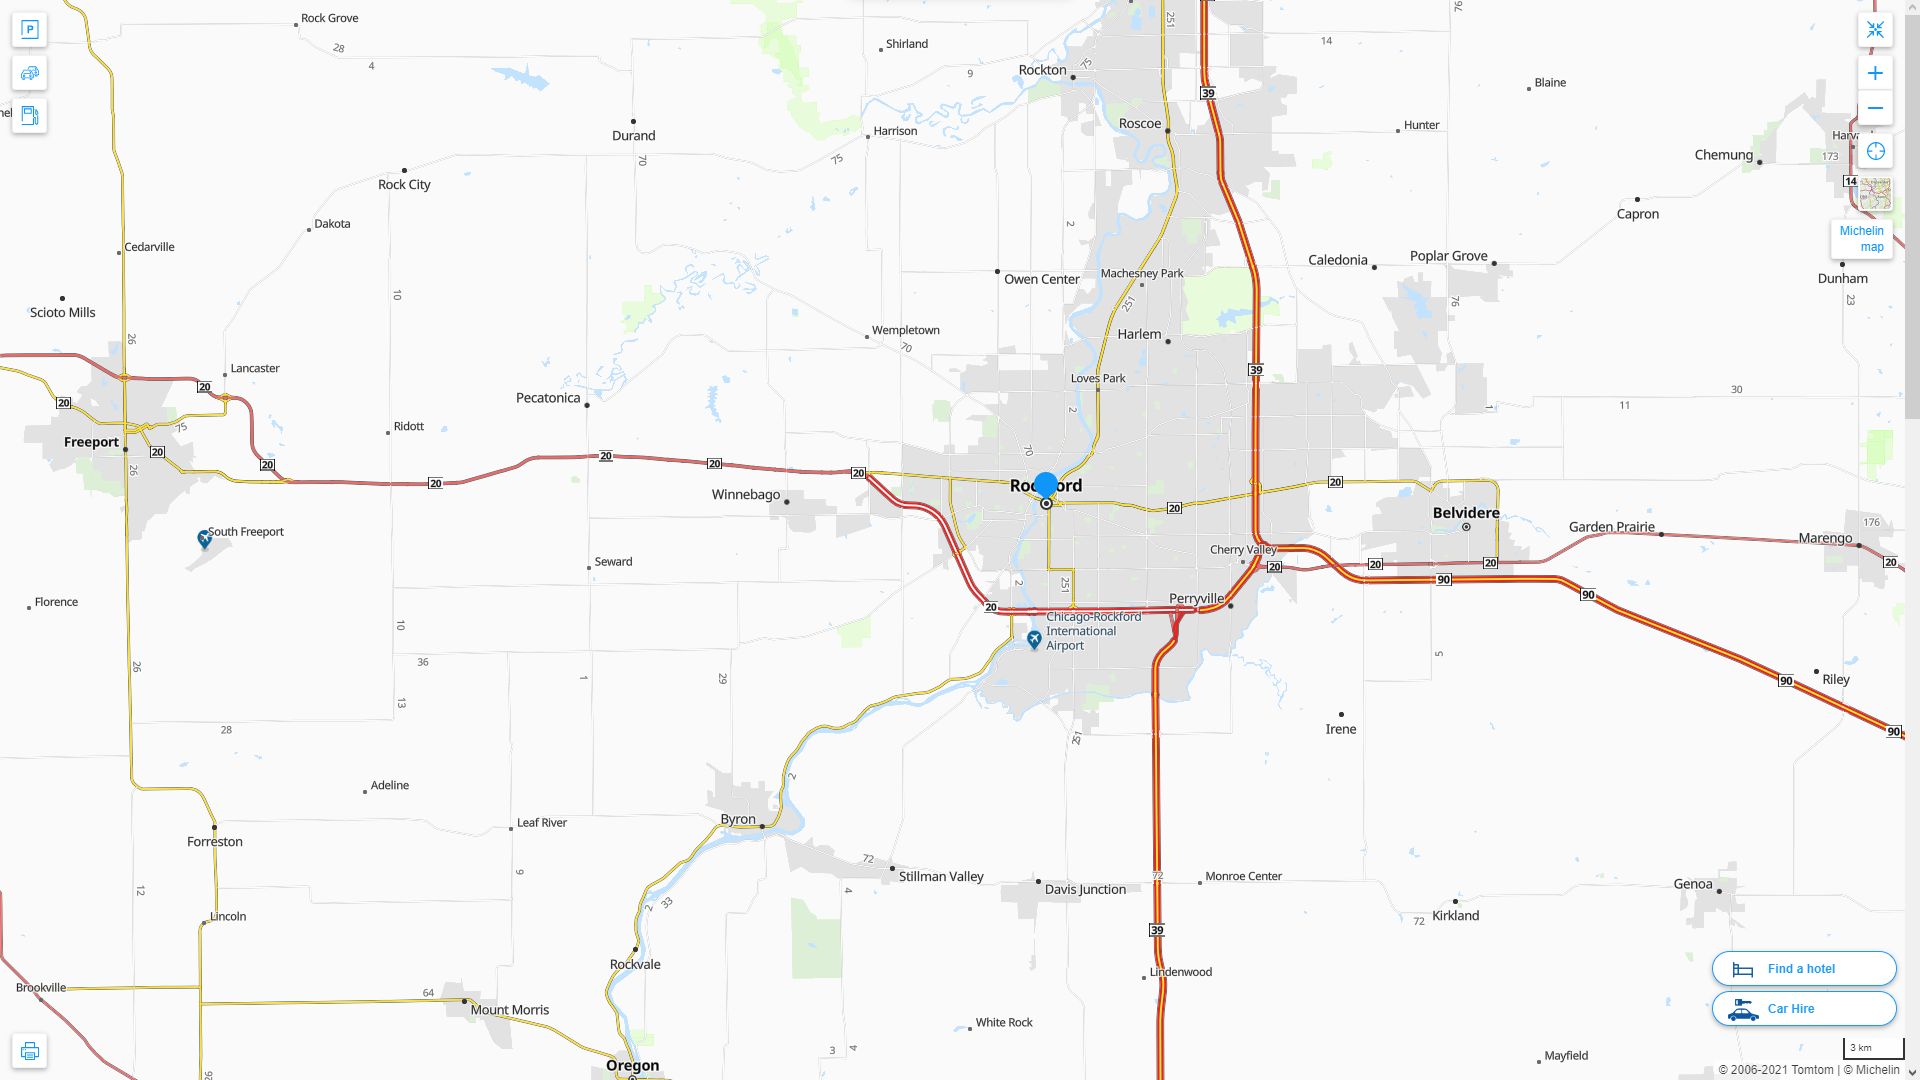 Rockford illinois Highway and Road Map